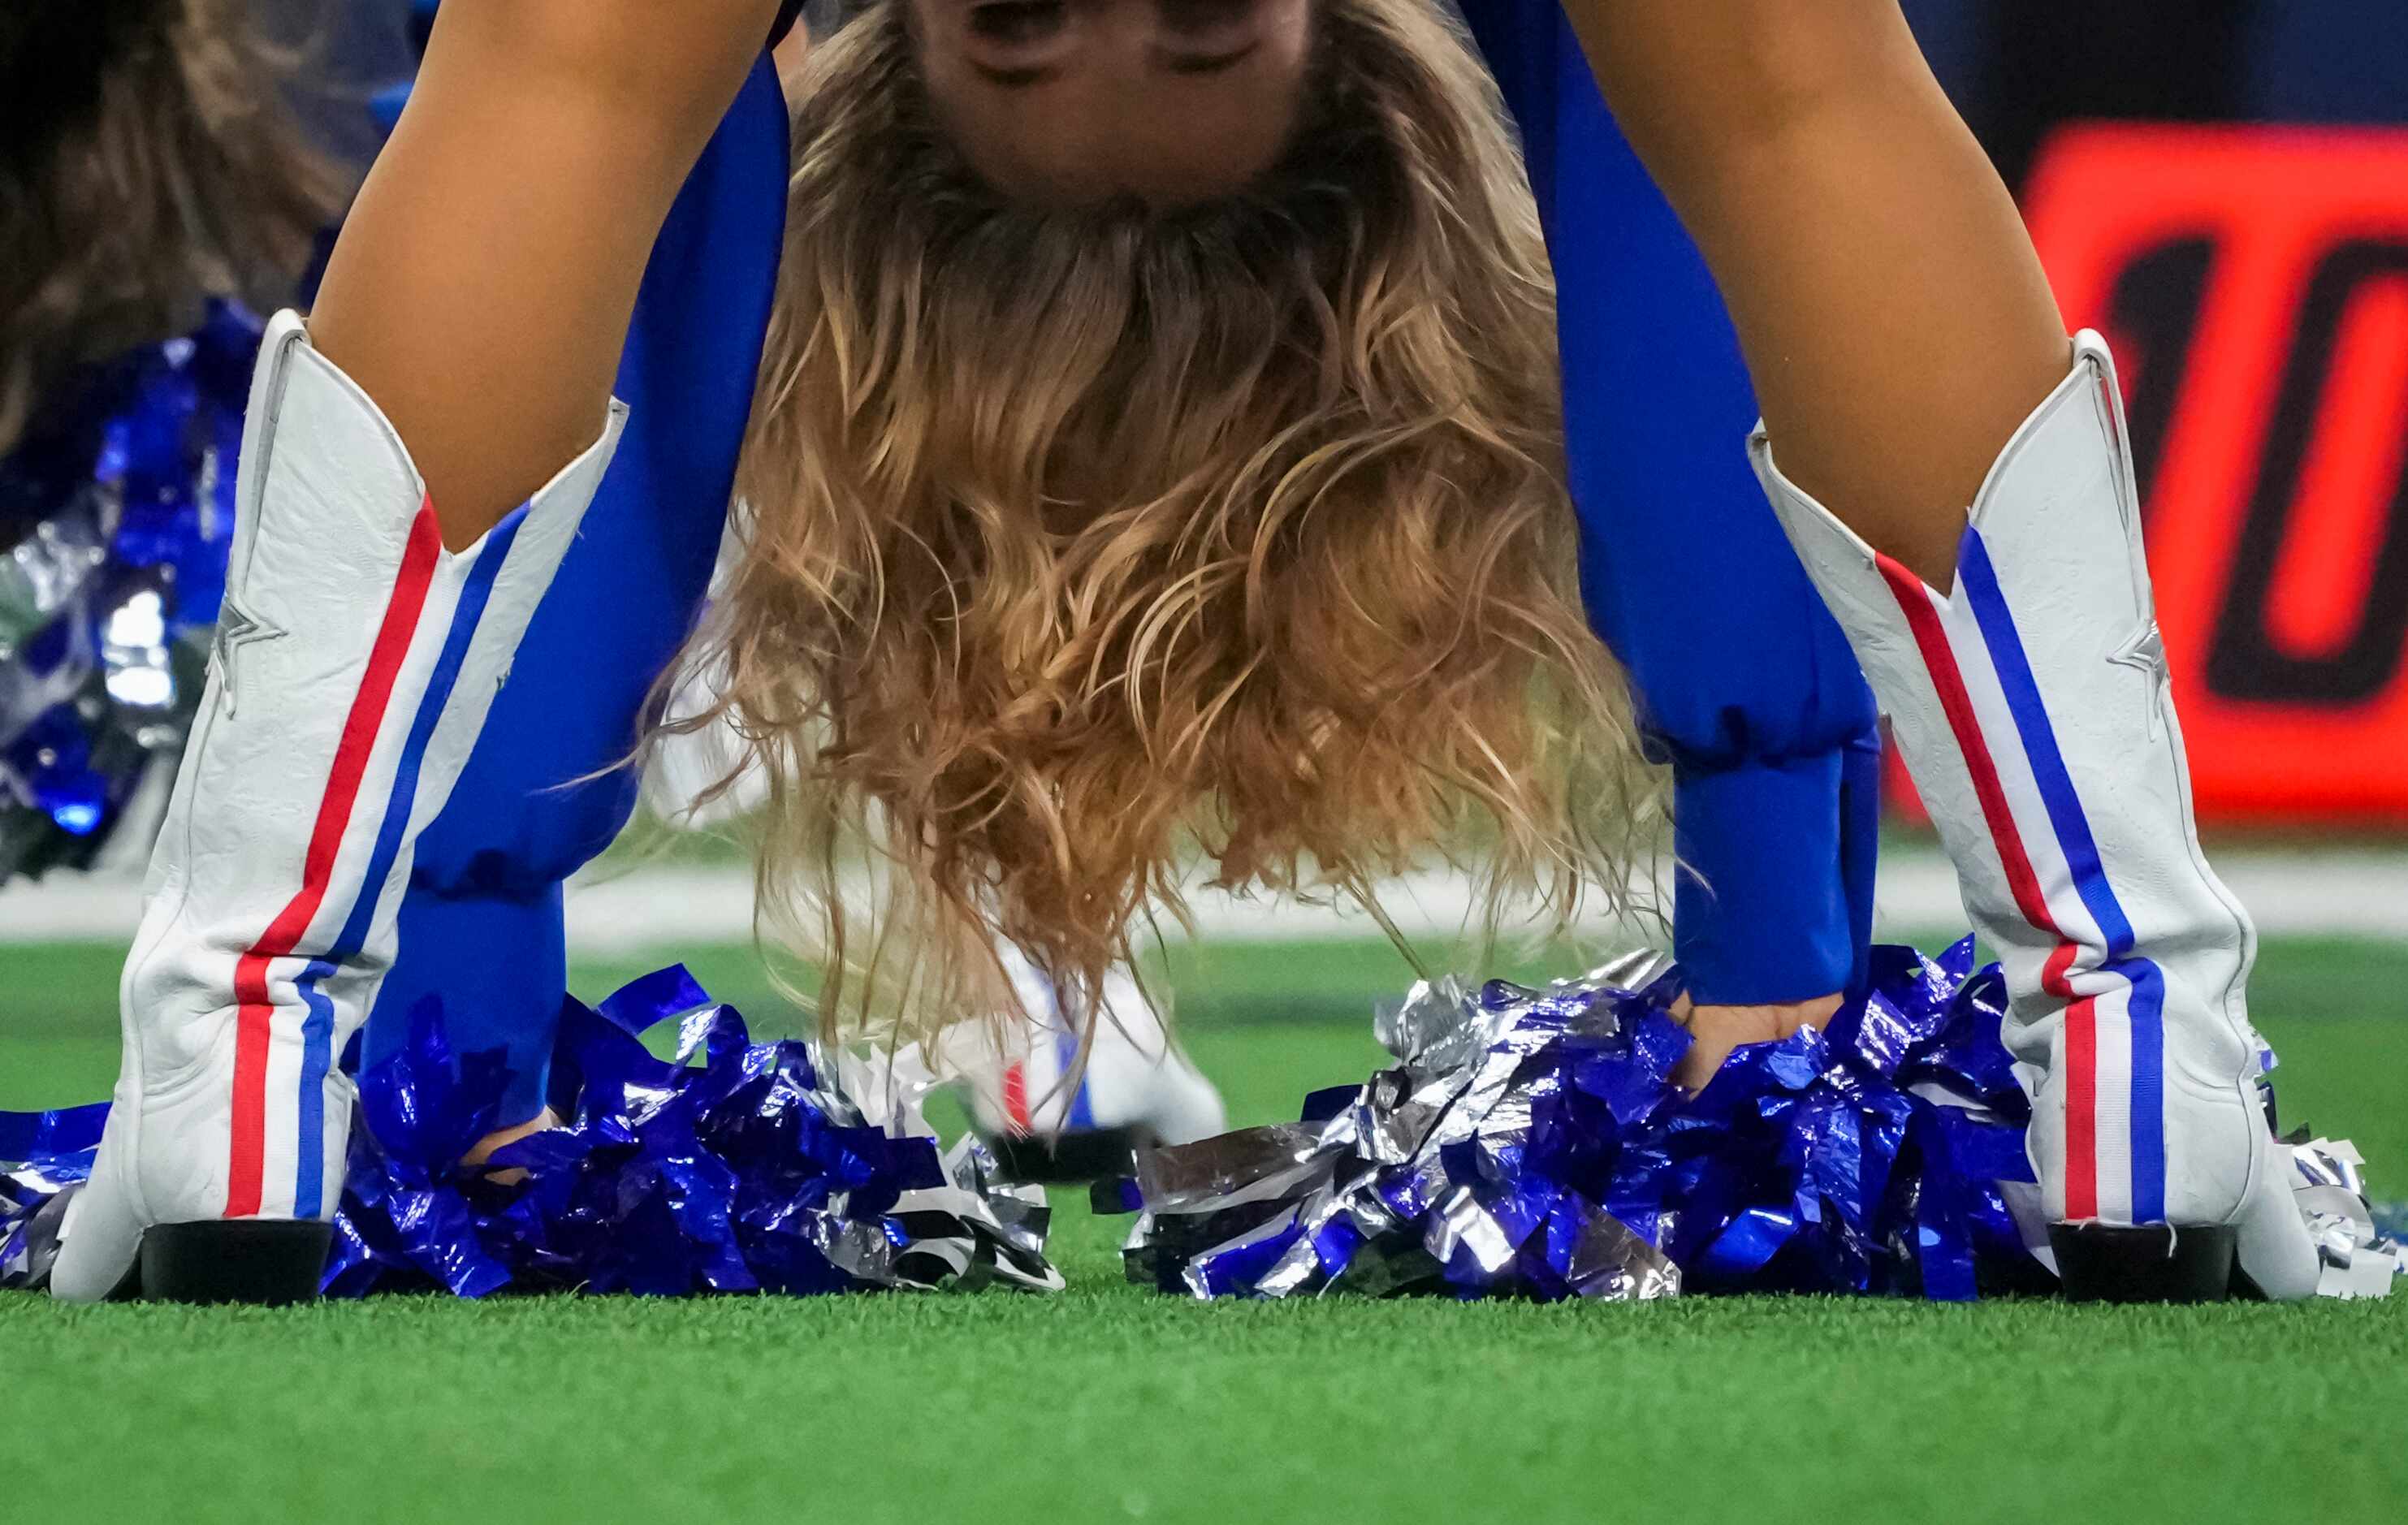 Dallas Cowboys cheerleaders where boots with red, white and blue stripes in recognition of...